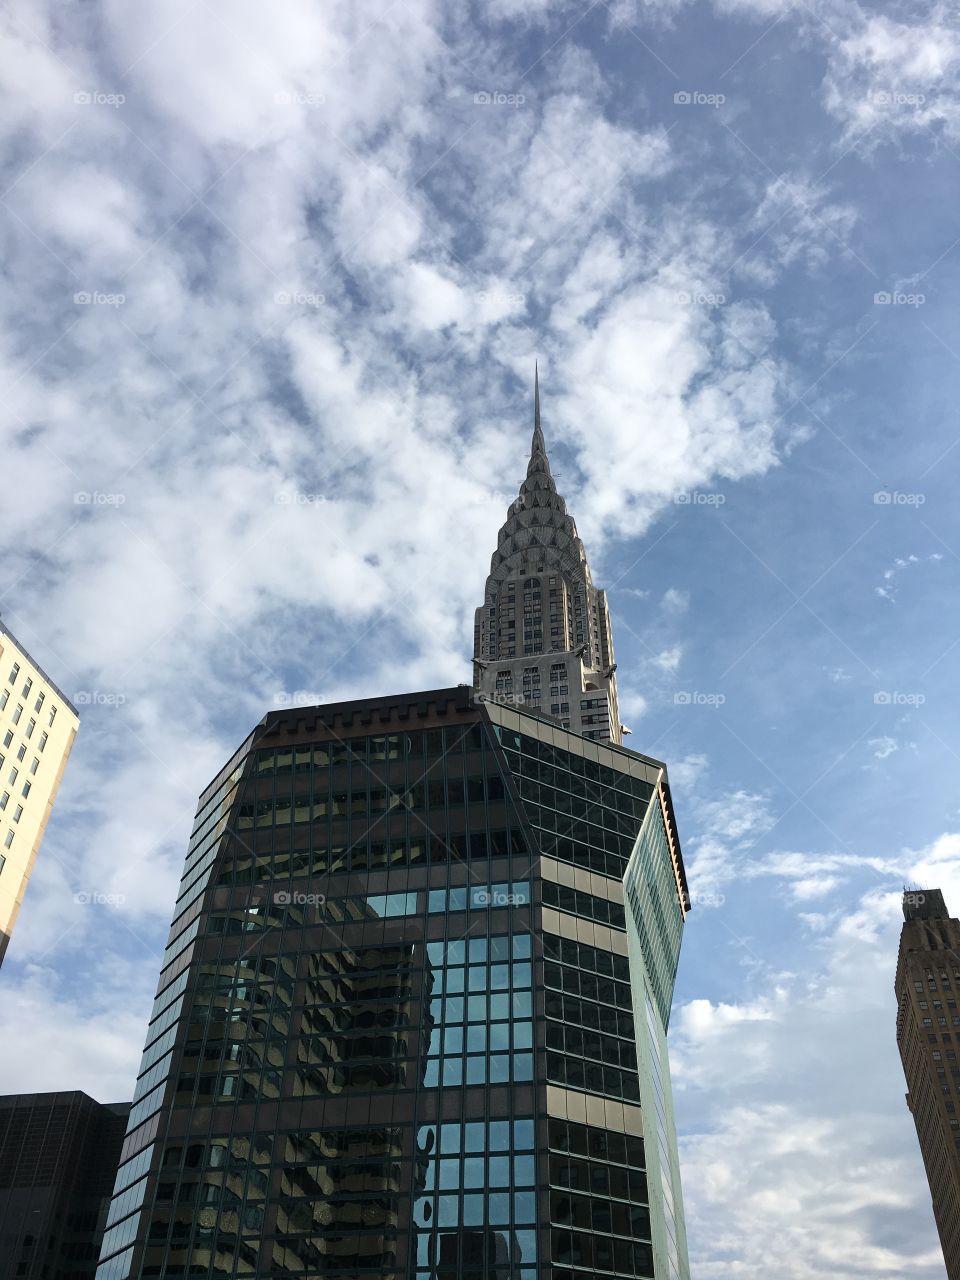 Gorgeous view of the skyline from street level. Looking up to the blue sky with soft clouds forming just behind the building